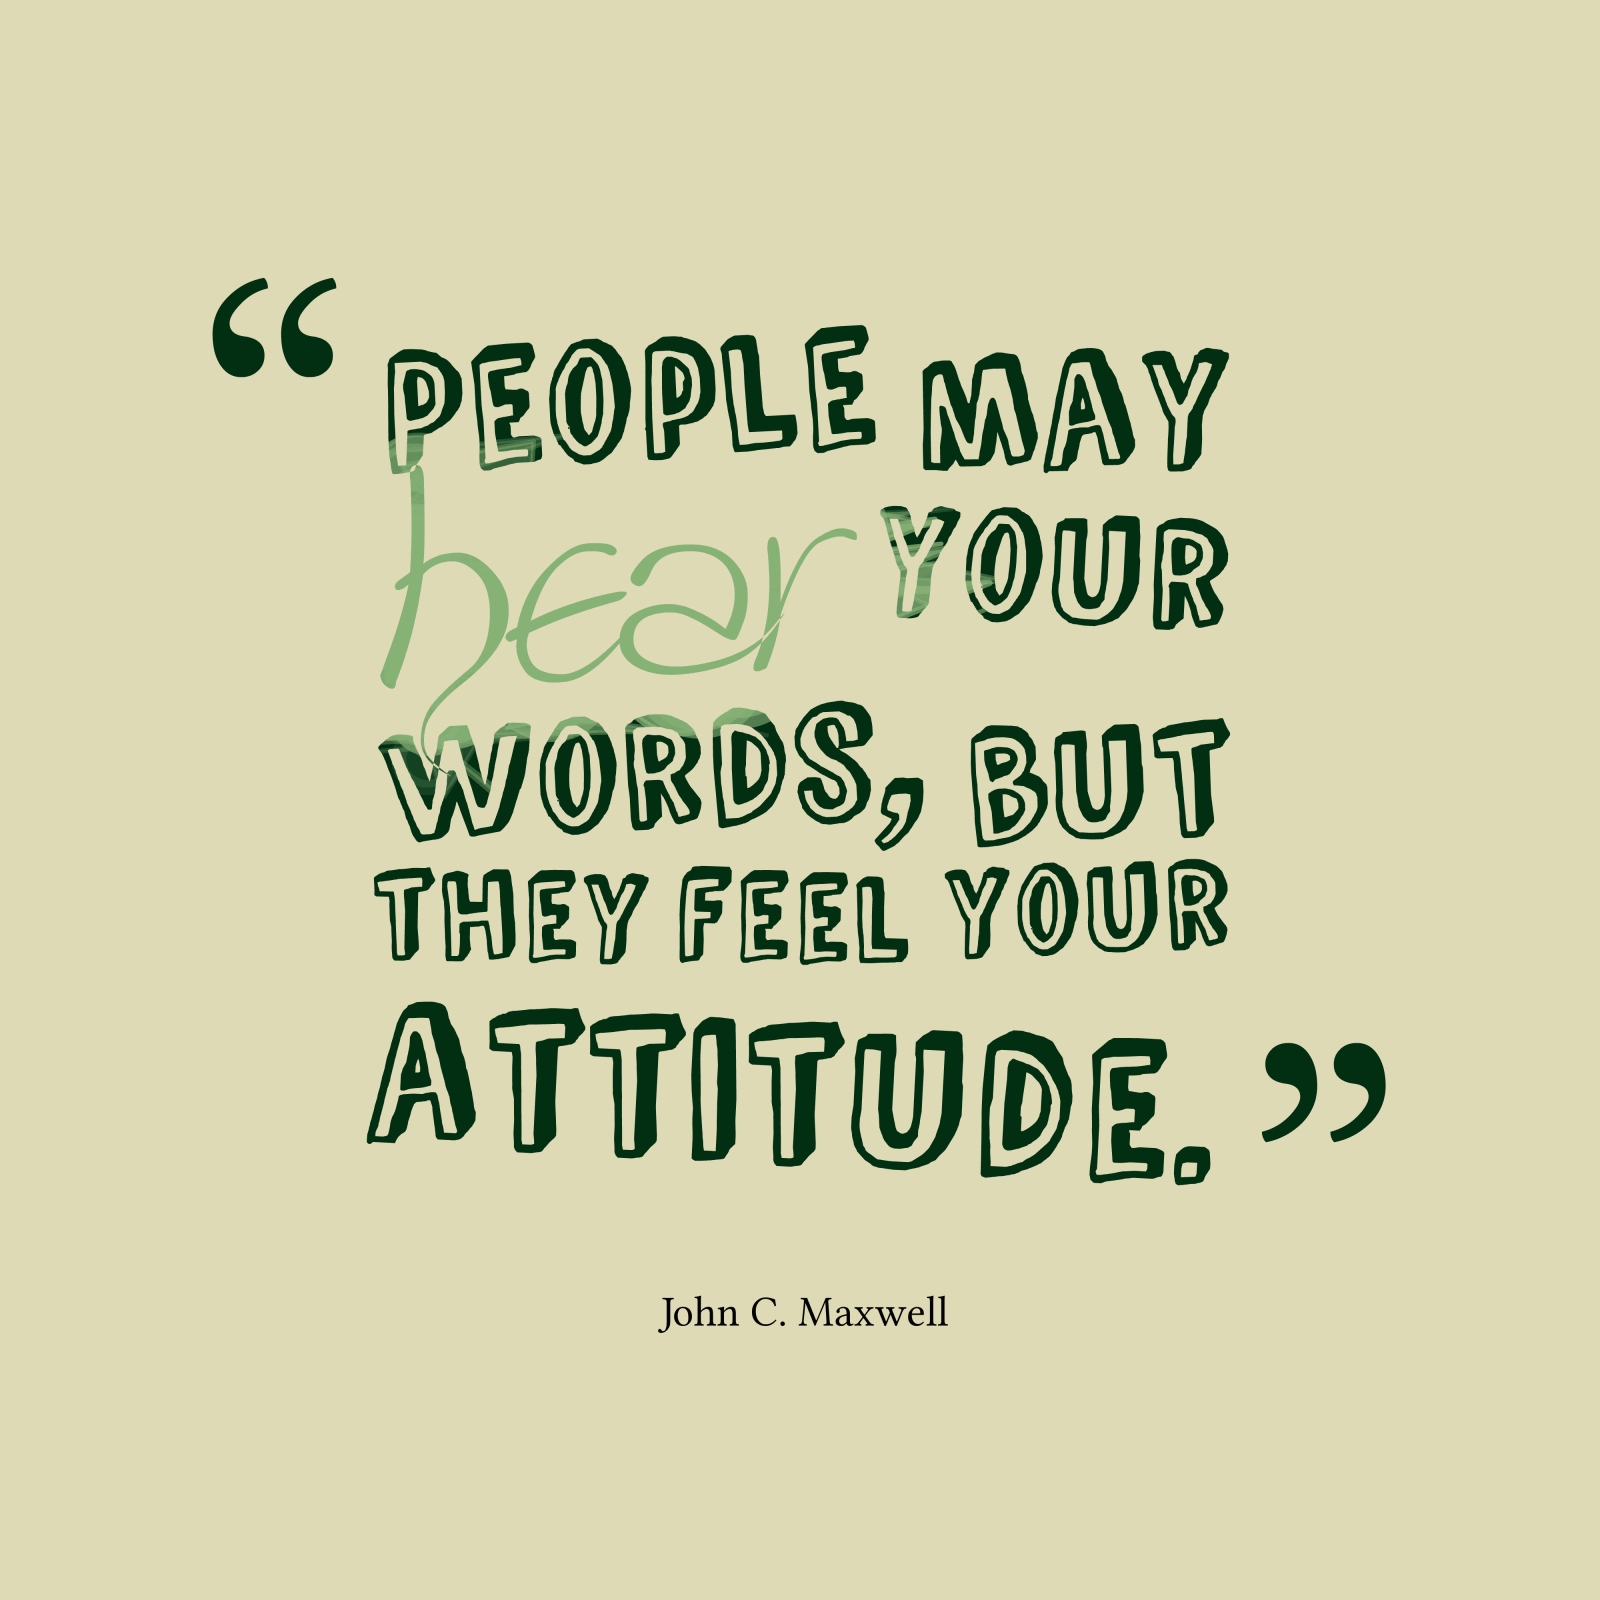 People may hear your words, but they feel your attitude. - John C. Maxwell